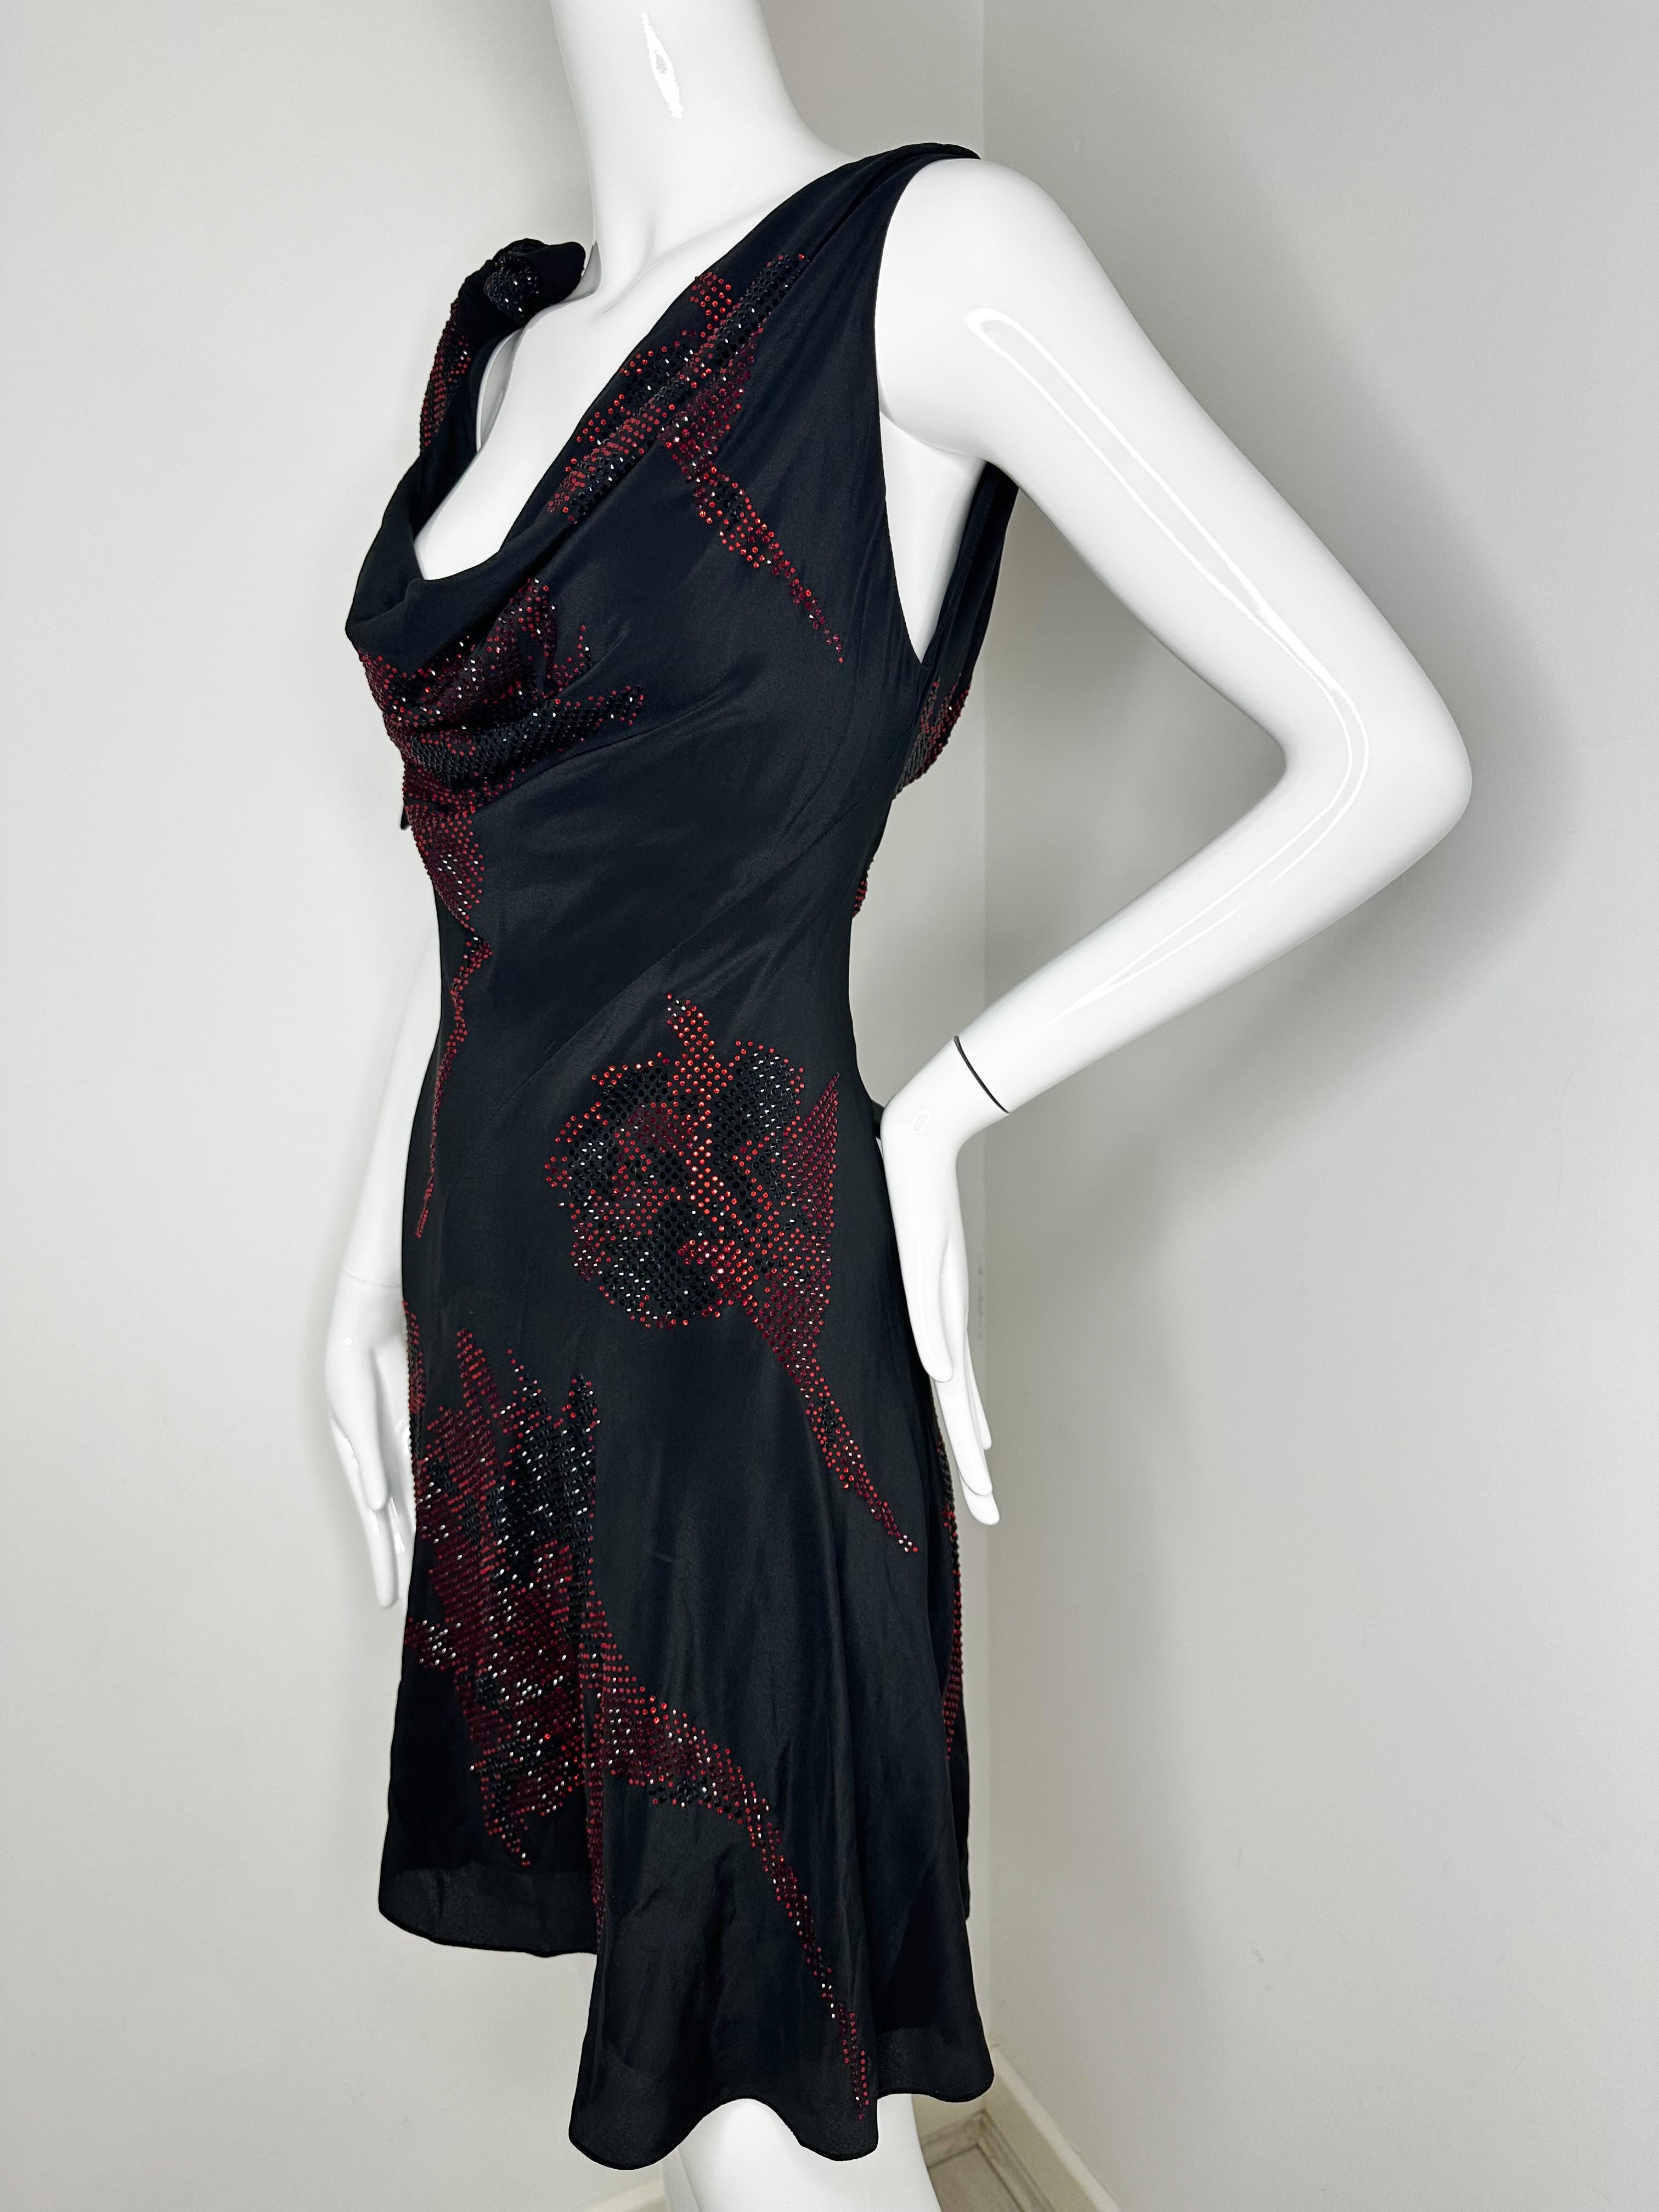 Roberto Cavalli Tulip red and black crystal embellished mini dress 

New with tags 
Size 40 

Original $4800